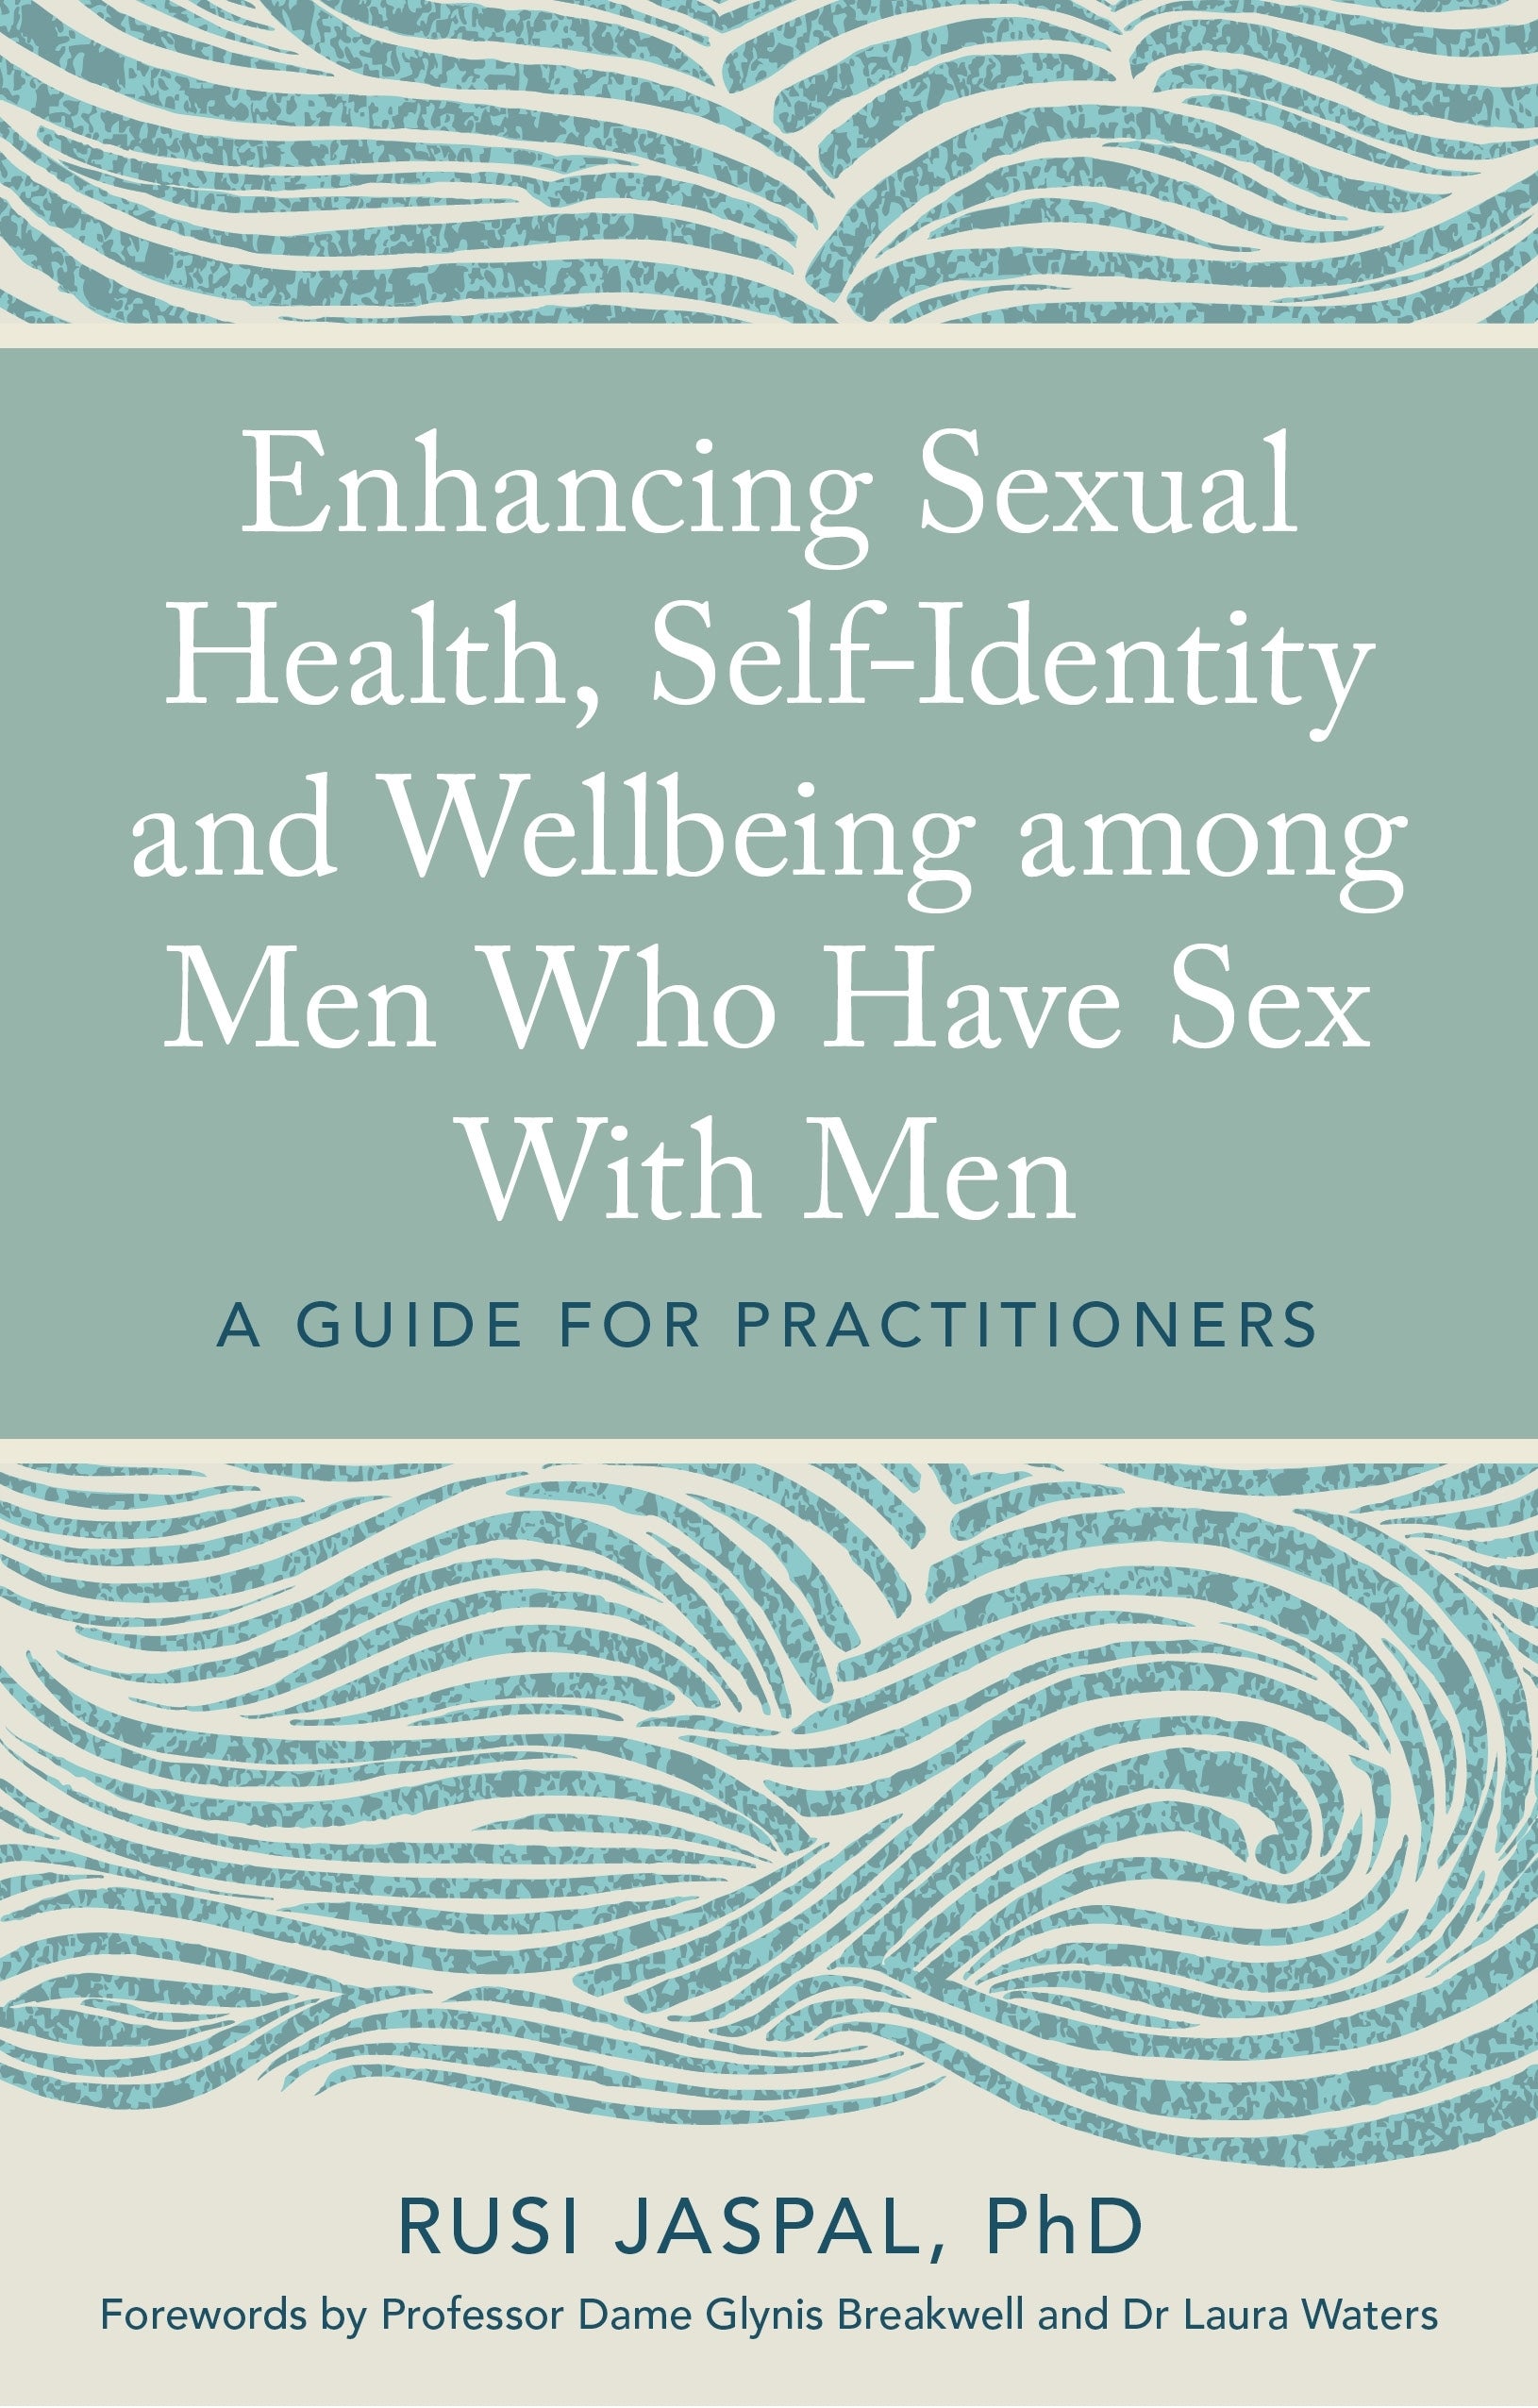 Enhancing Sexual Health, Self-Identity and Wellbeing among Men Who Have Sex With Men by Professor Dame Glynis Breakwell, Dr Laura Waters, Rusi Jaspal